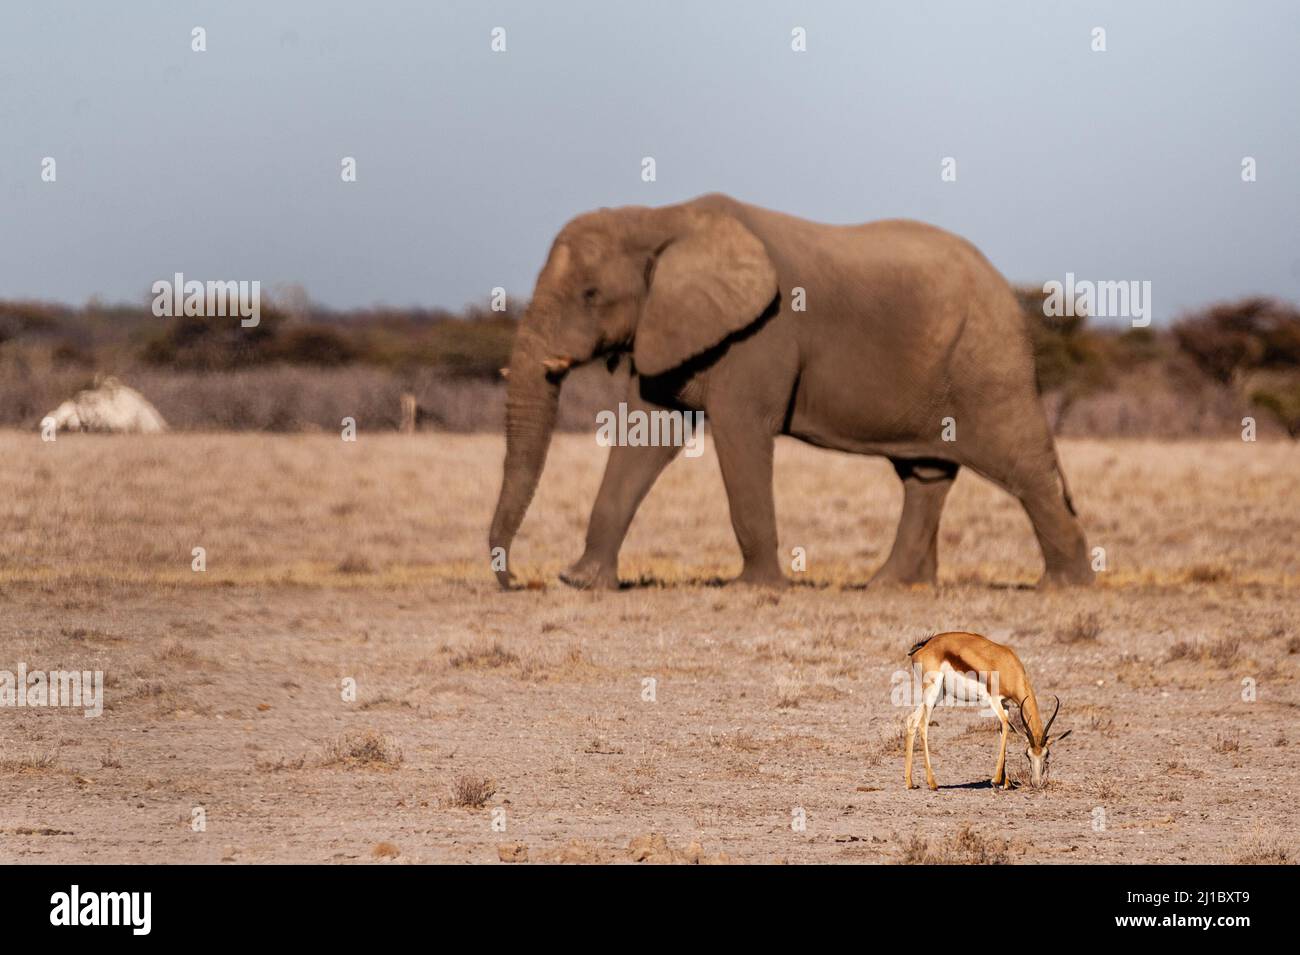 A small antelope grazing on the plains of Etosha National Park, with a gigantic elephant in the background. Stock Photo